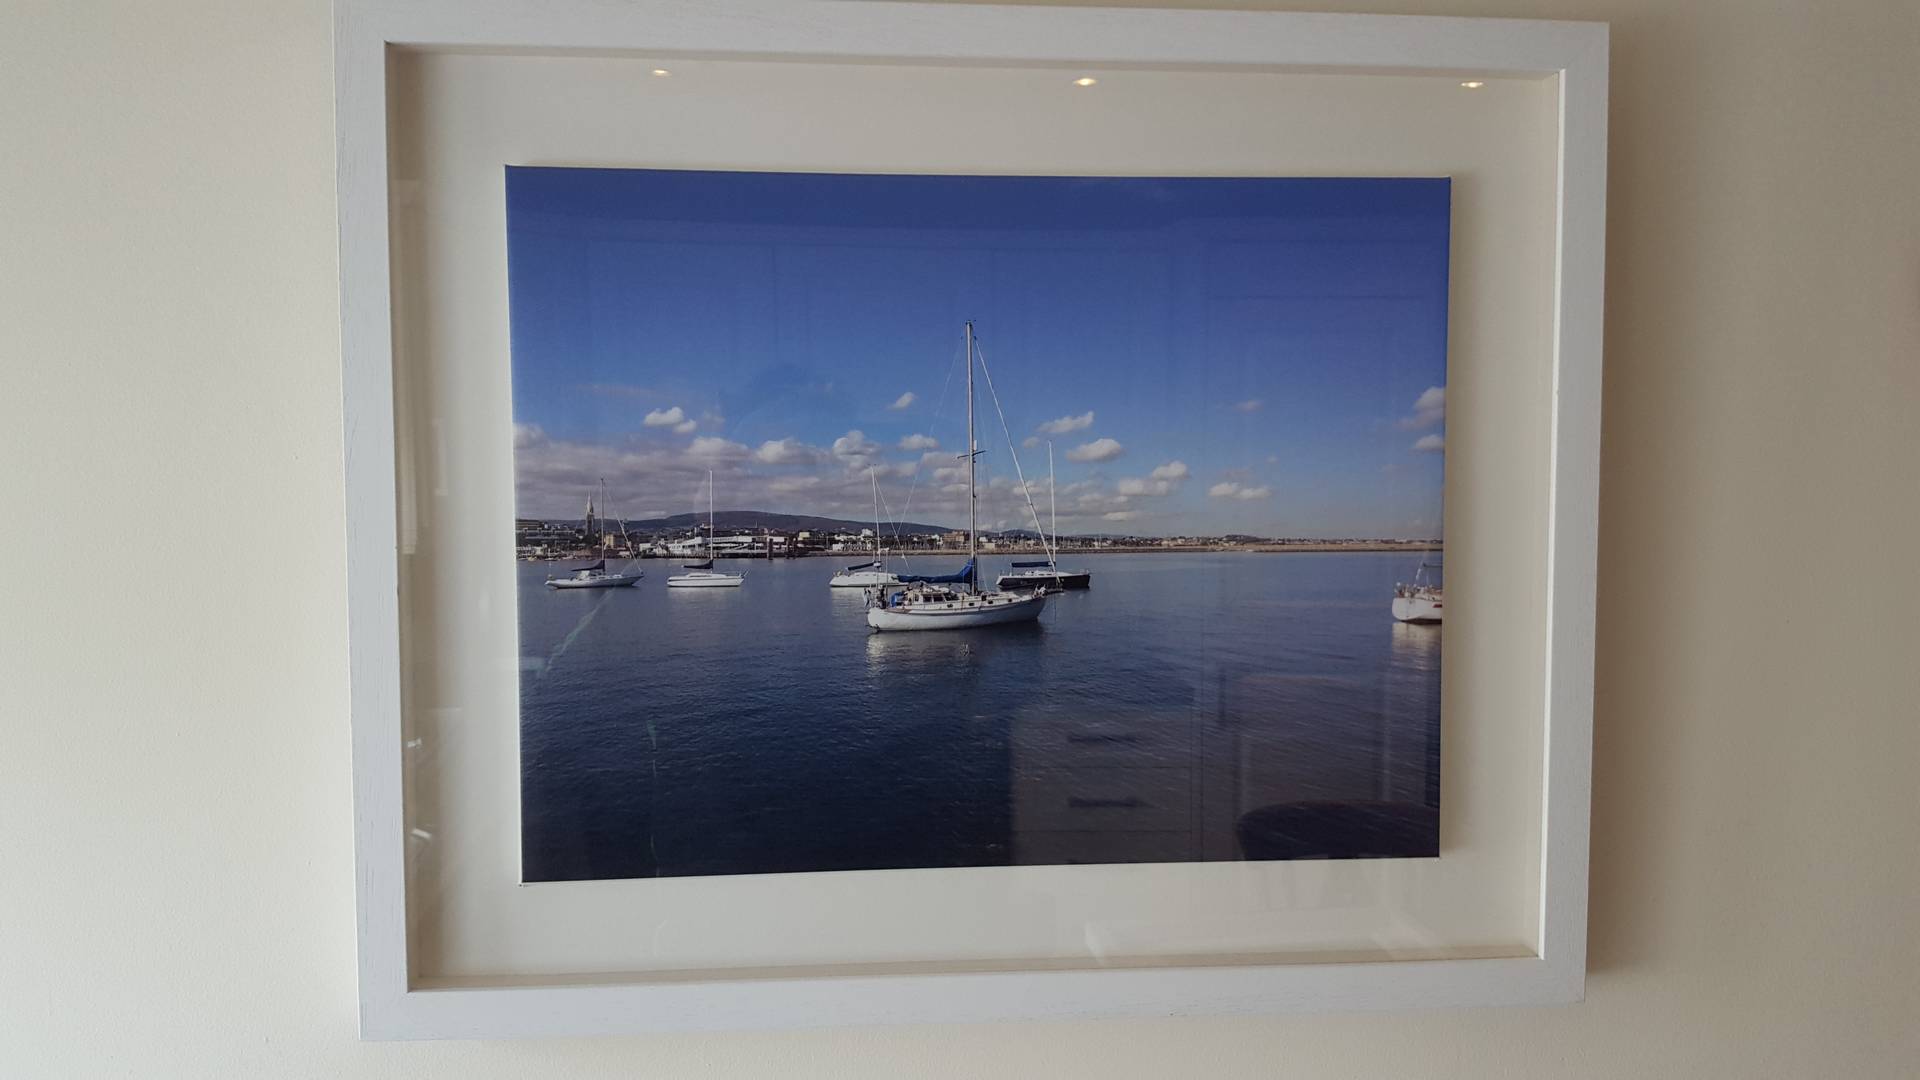 Picture Framing & Canvas Prints in Dublin CanvasCraft